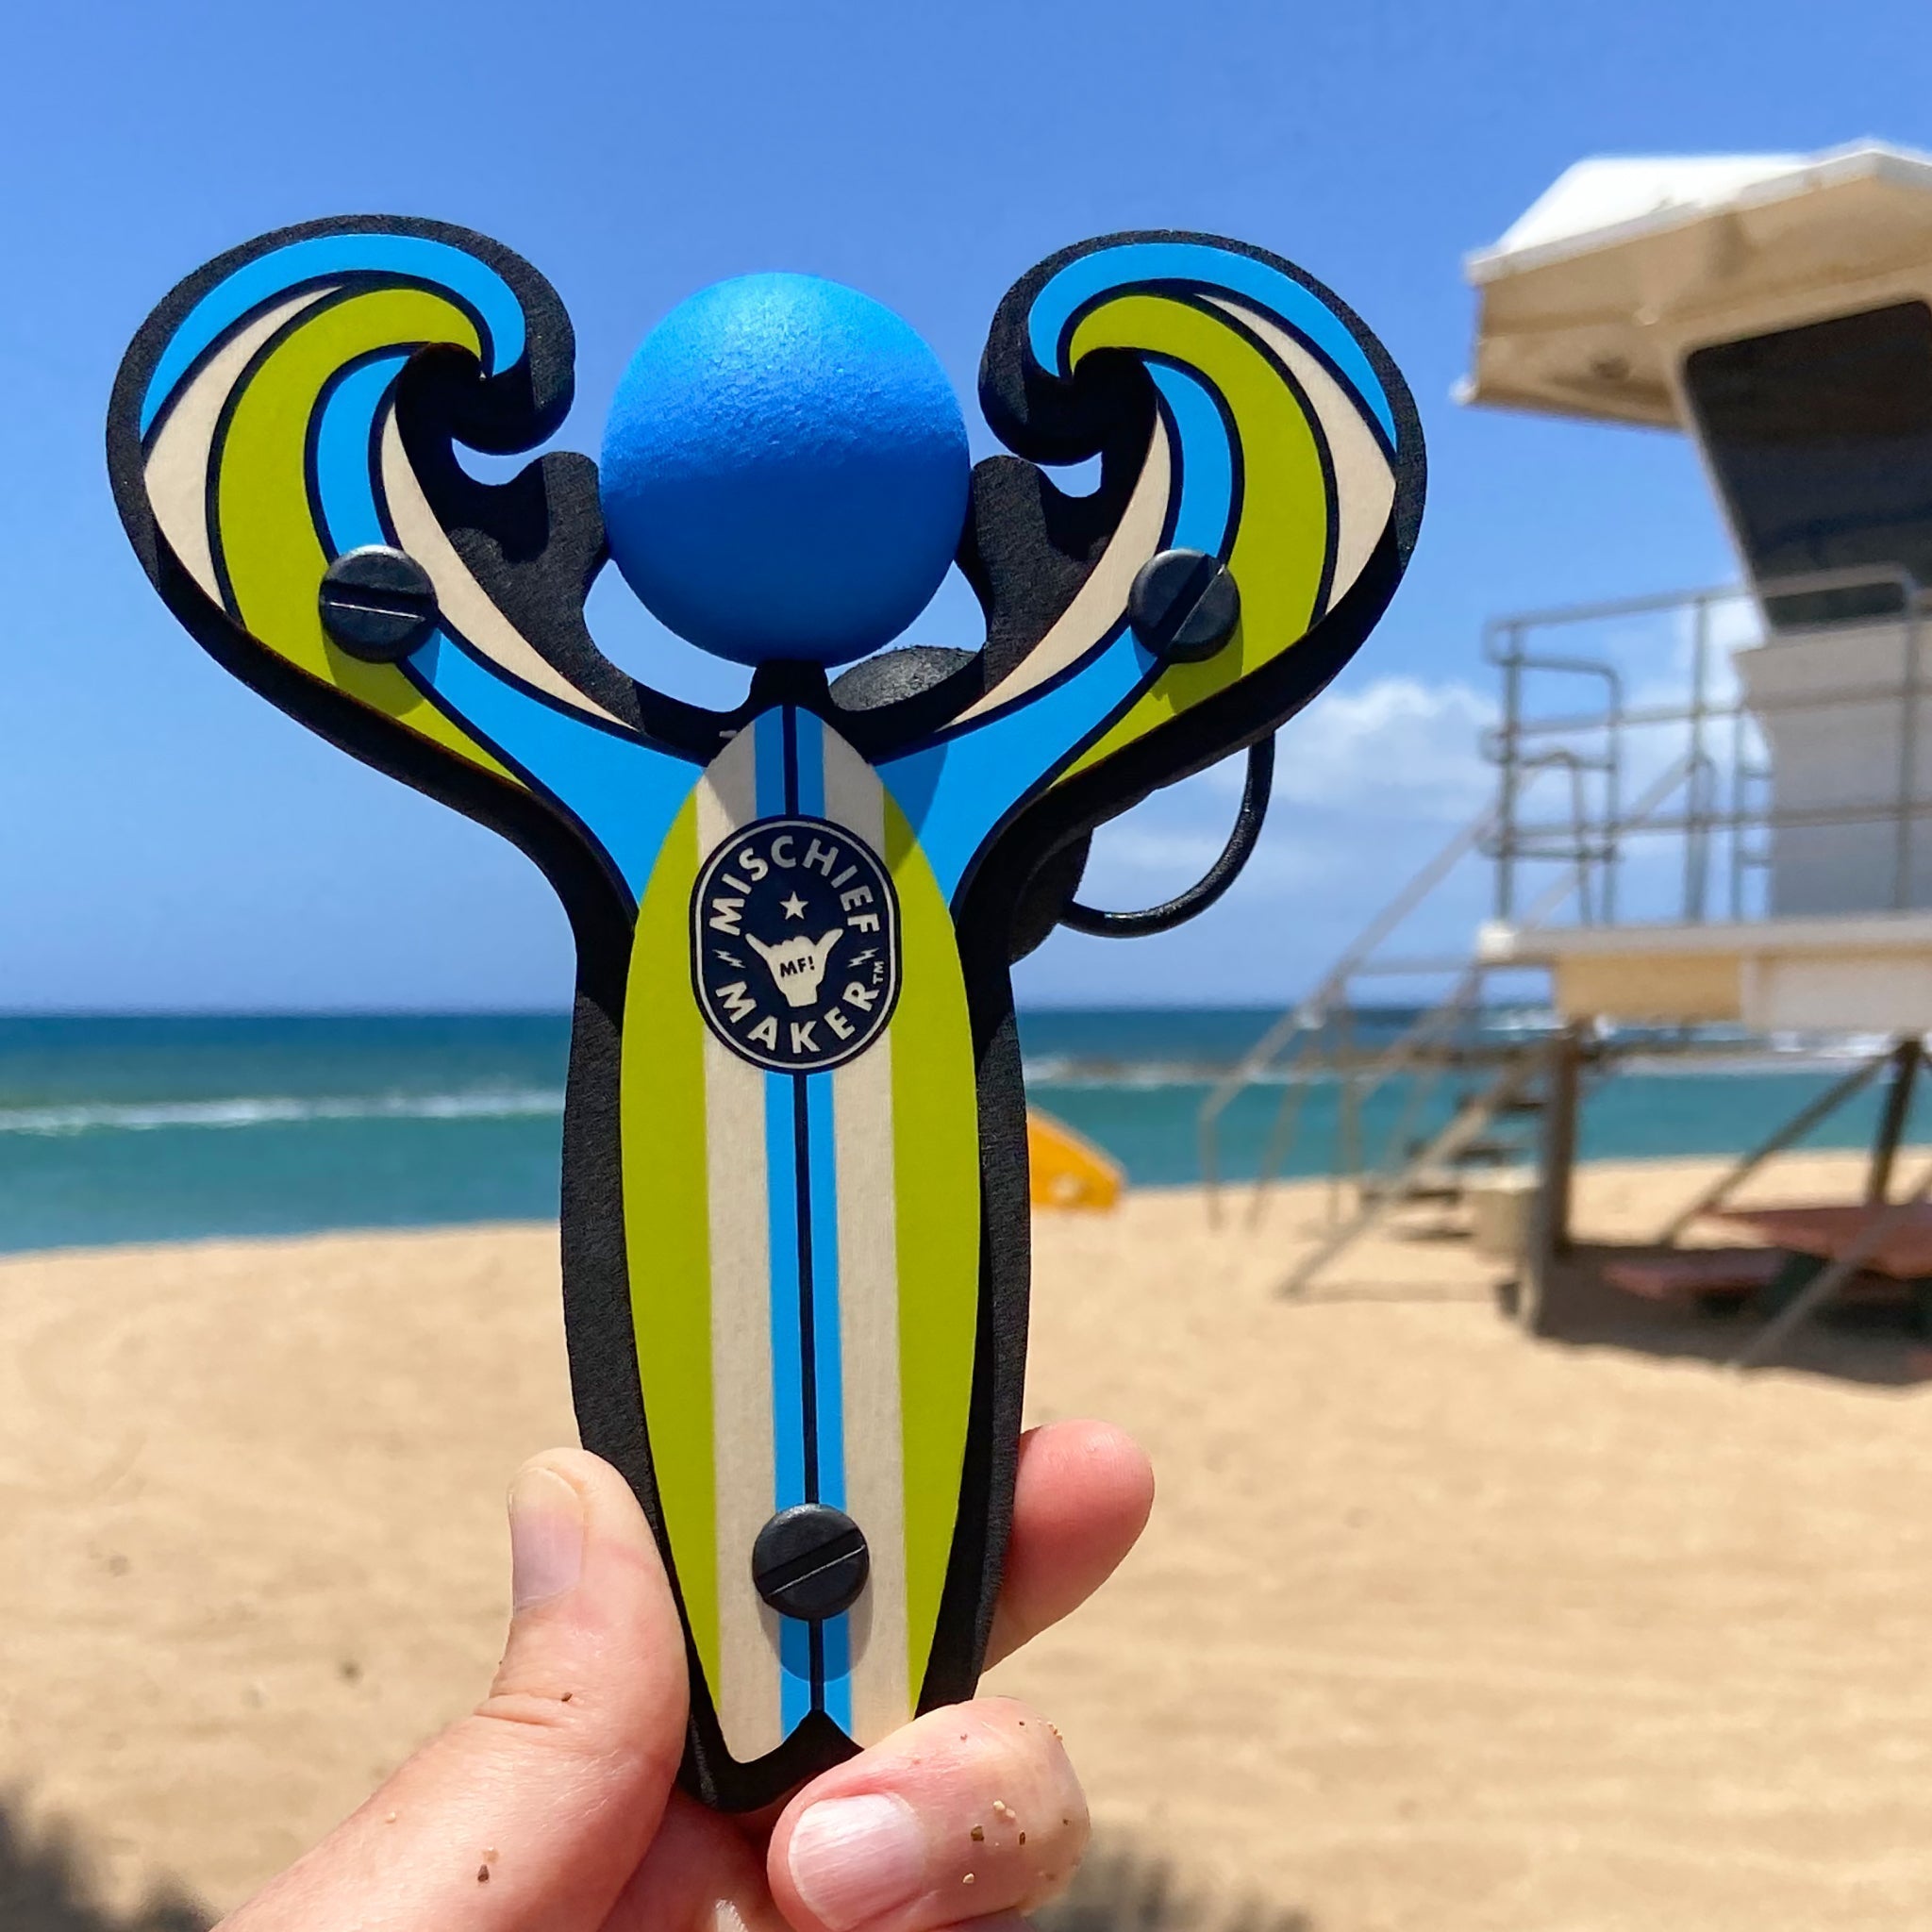 Blue Surf’s Up toy slingshot hand held by the ocean. Mischief Maker by Mighty Fun!